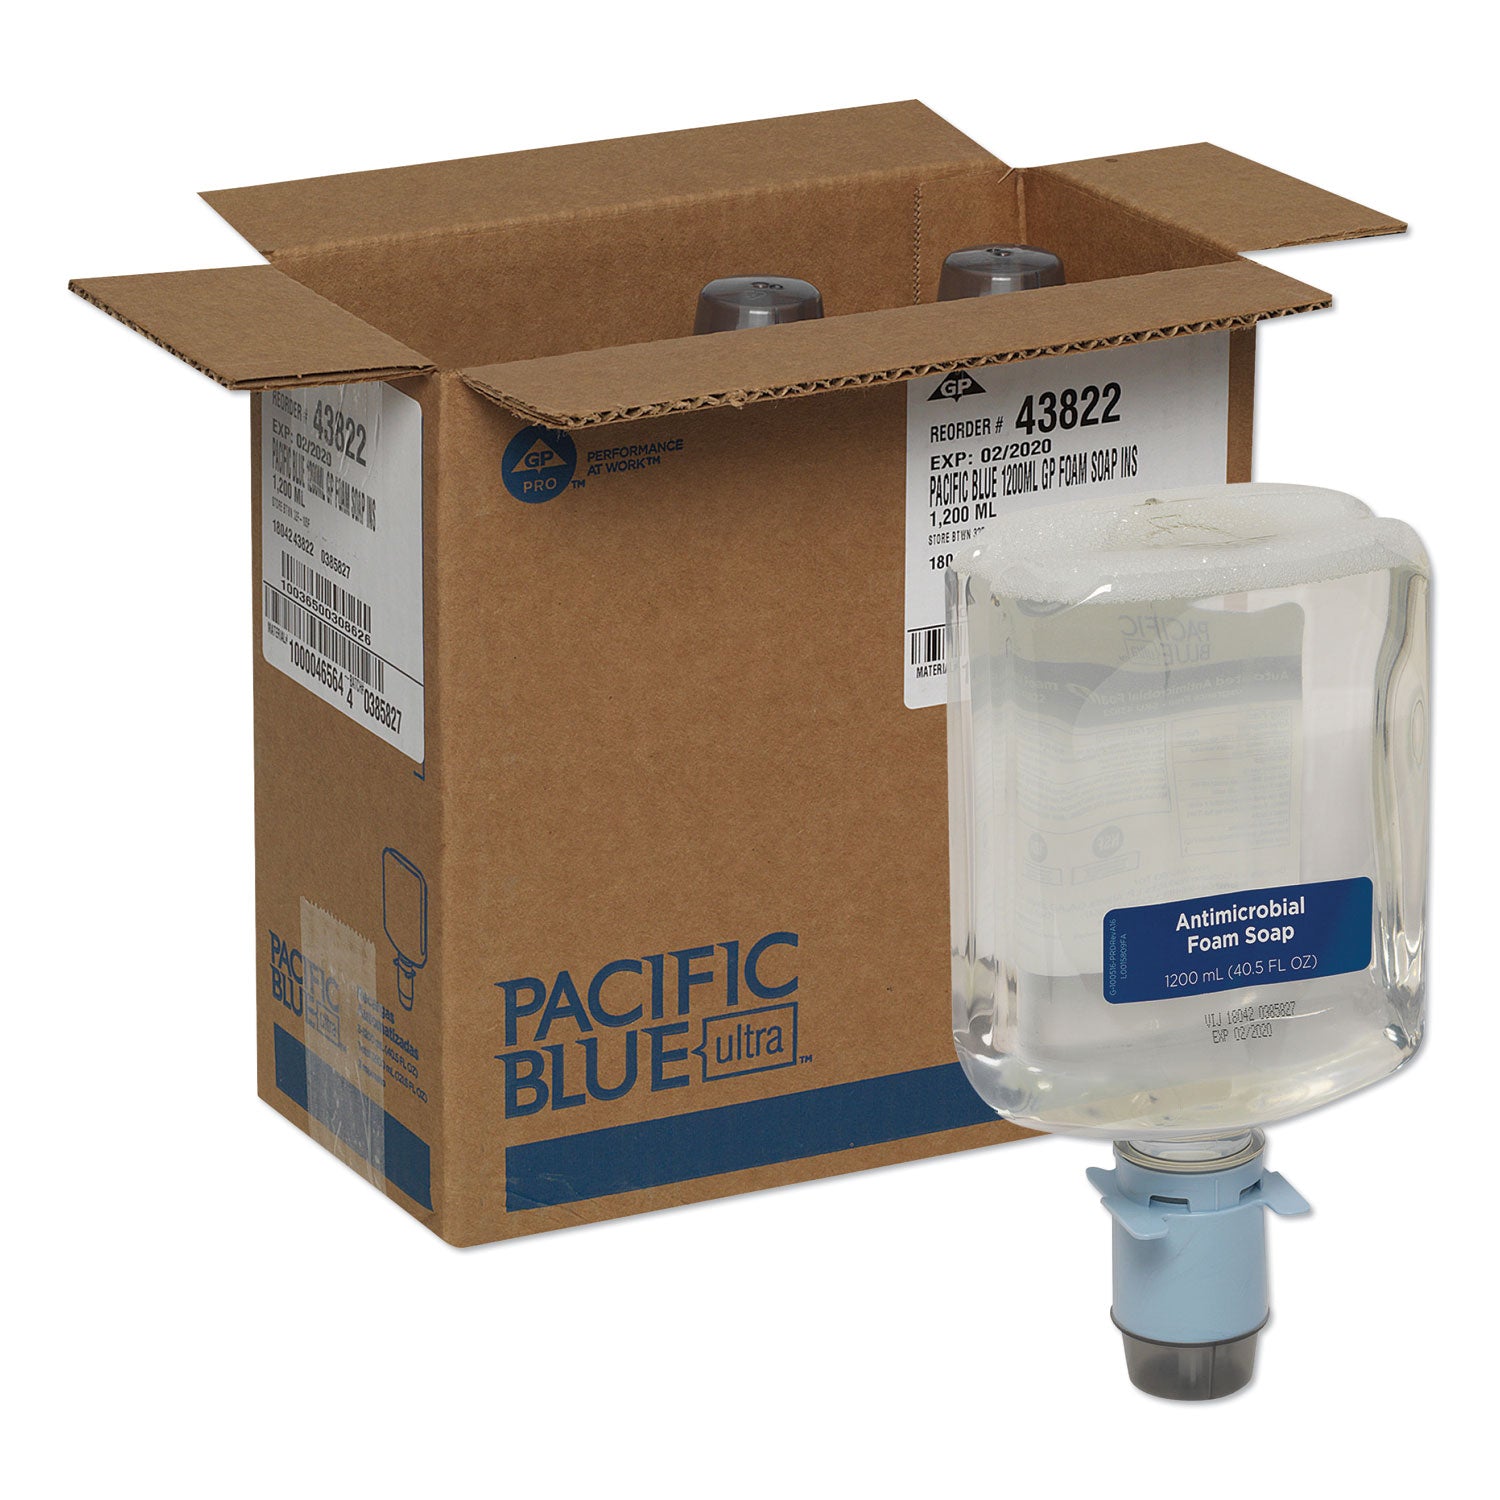 pacific-blue-ultra-automated-foam-soap-refill-antimicrobial-e2-rated-fragrance-free-1200-ml-3-carton_gpc43822 - 2